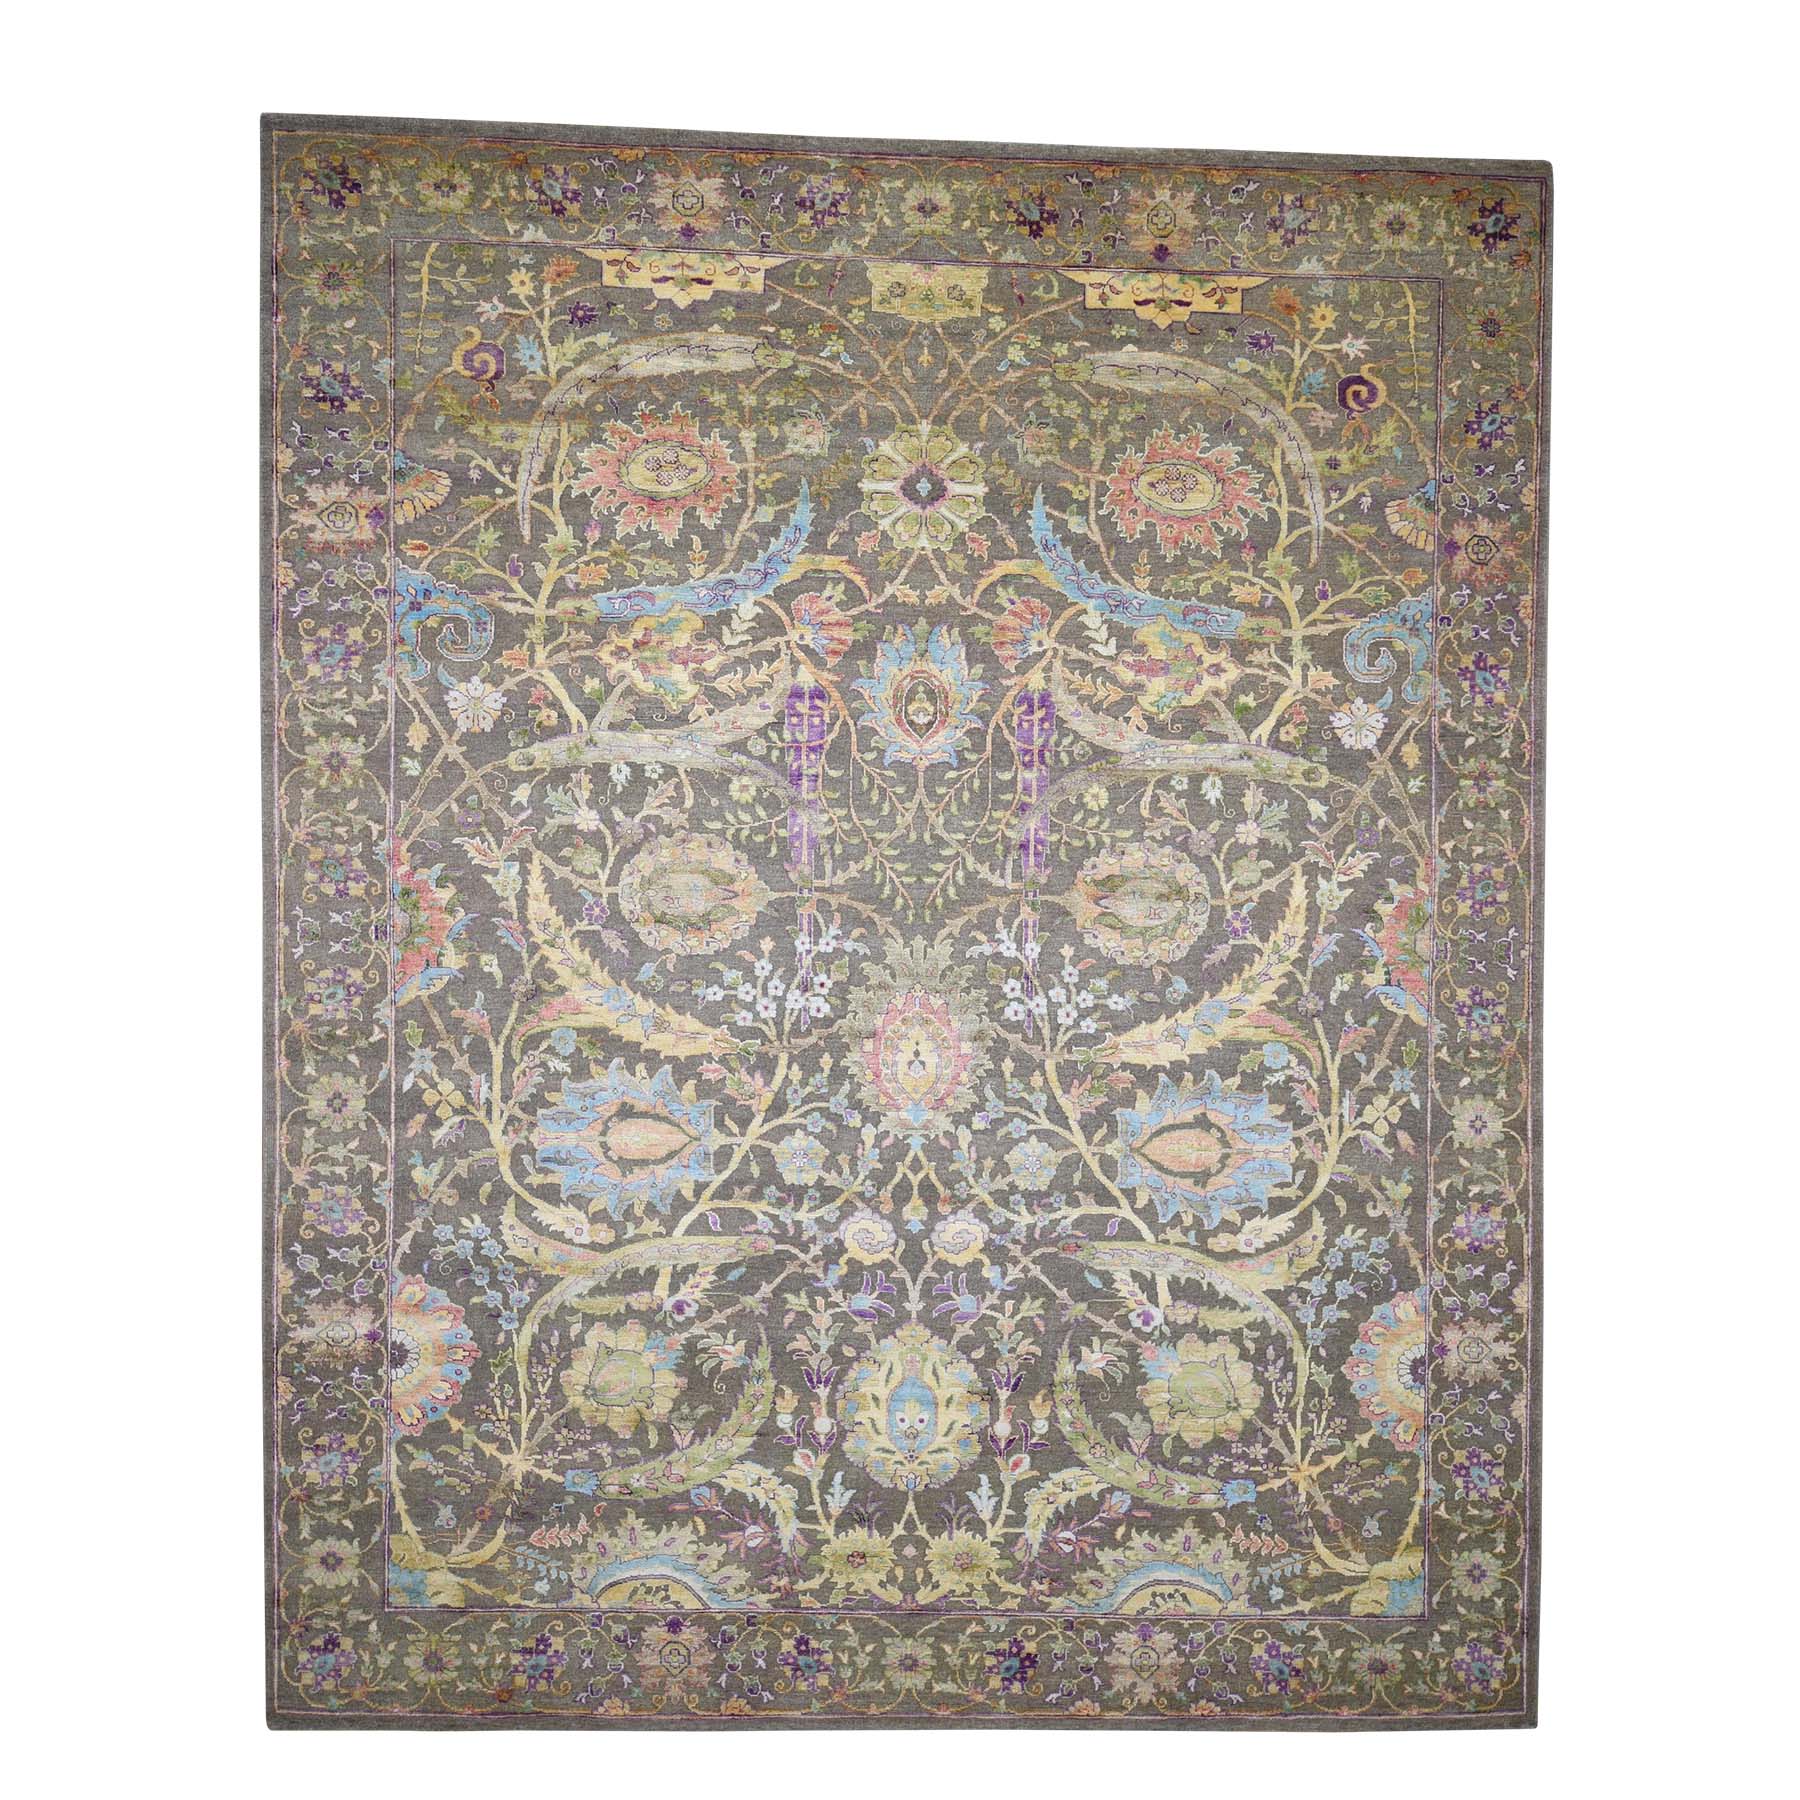 8'x10' Hand Woven Sickle Leaf Design Pure Silk with Textured Wool Oriental Rug 